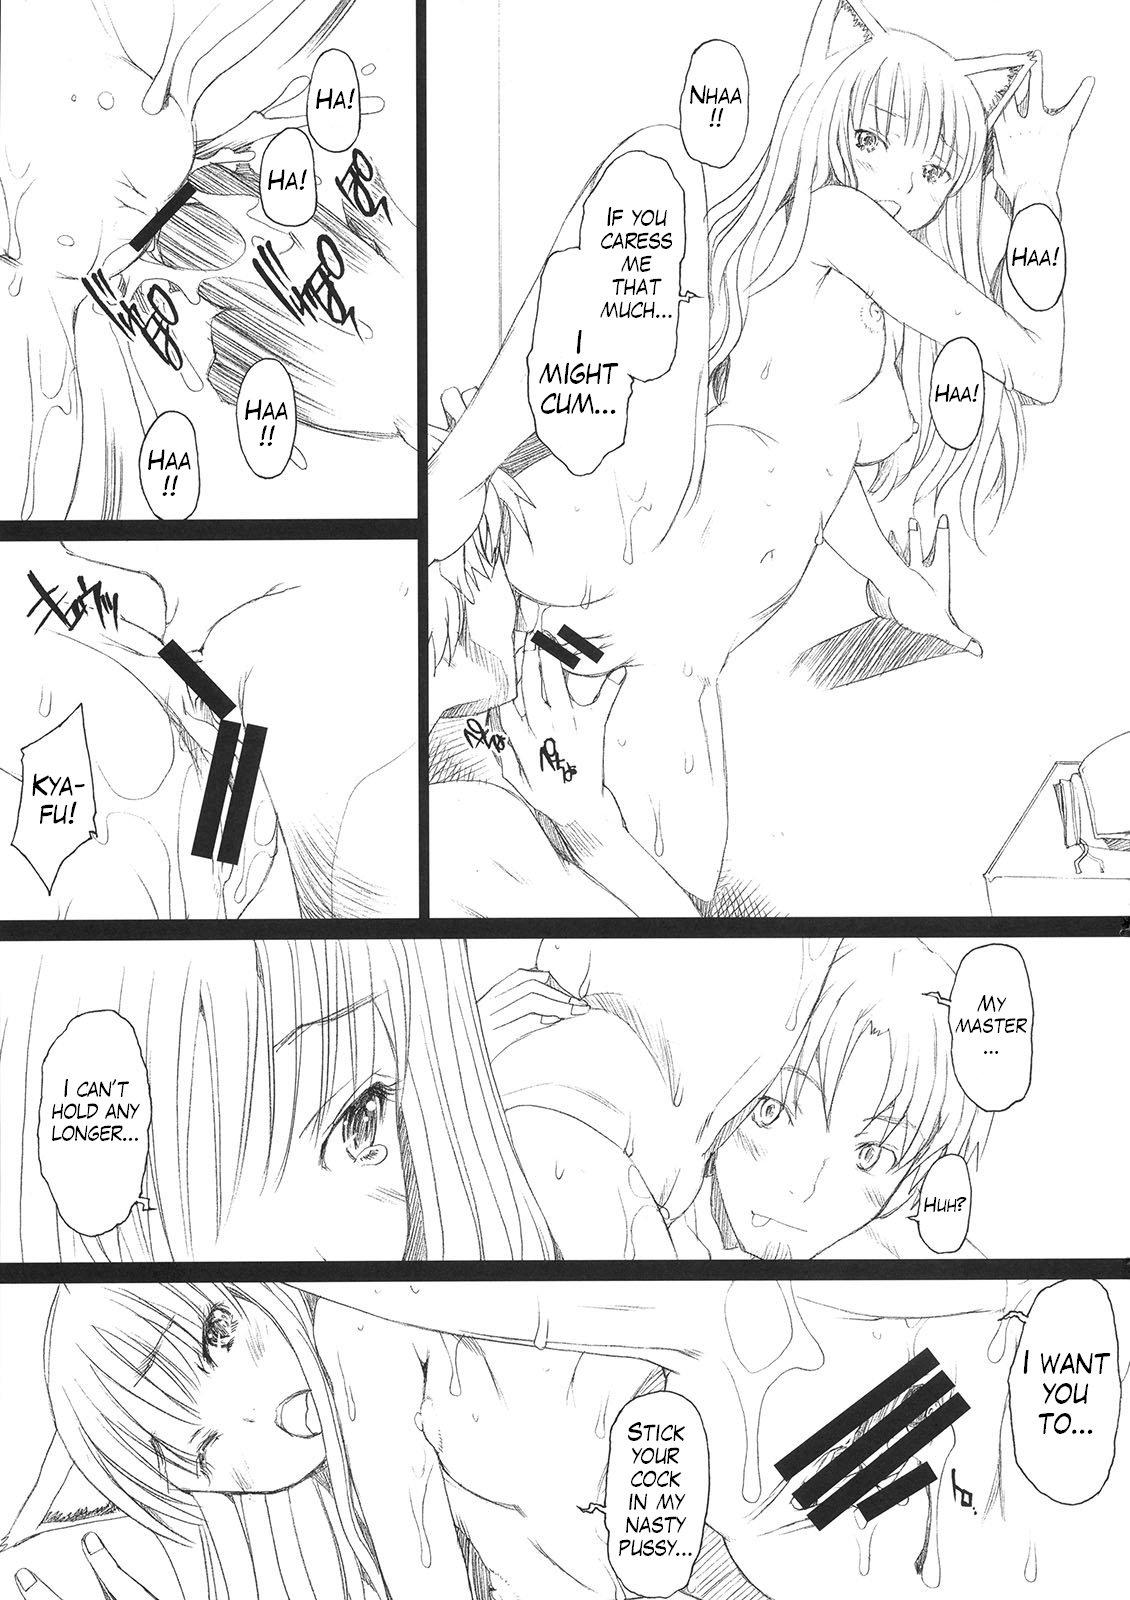 Pissing Ai ga Horohoro - Spice and wolf Culona - Page 8